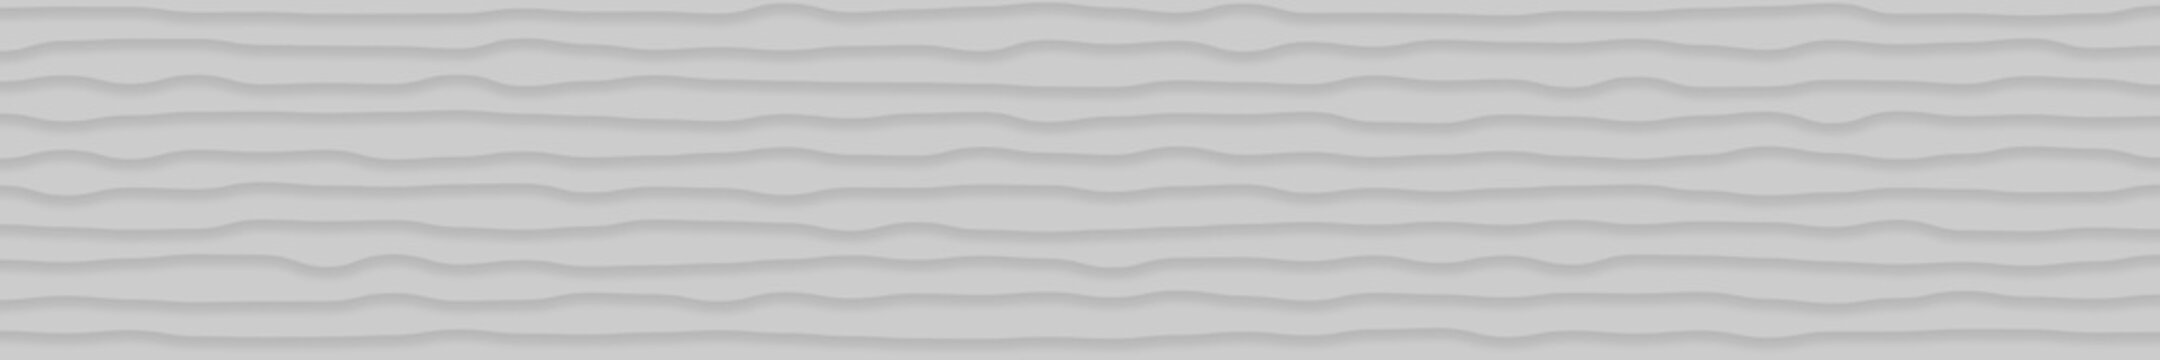 Abstract horizontal banner of wavy lines with shadows in gray colors © Aleksei Solovev